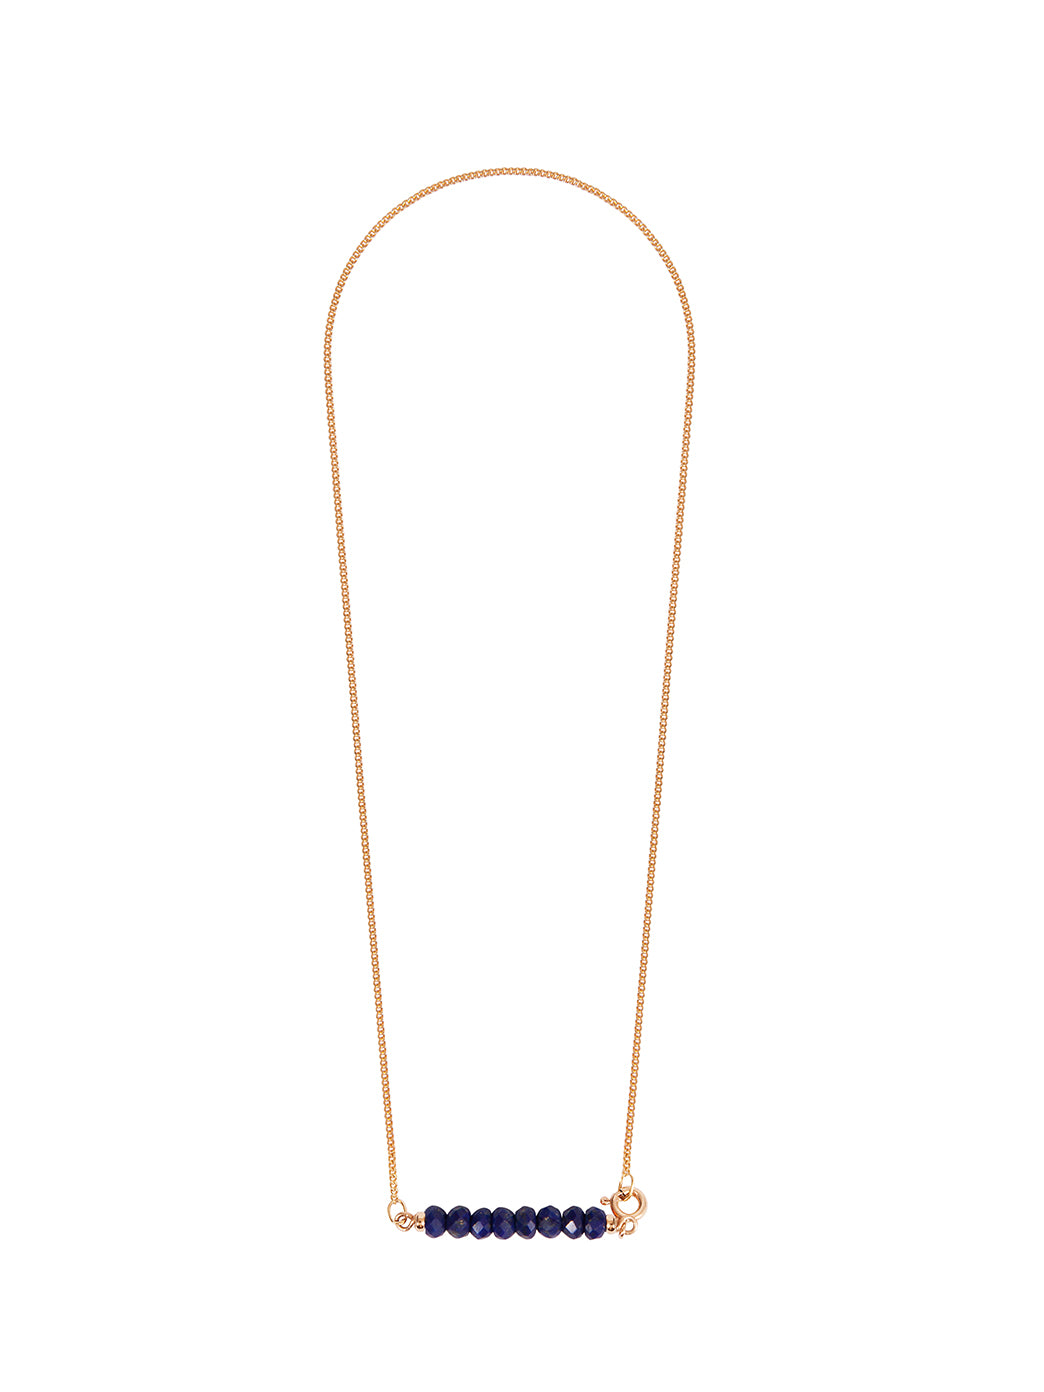 Fiorina Jewellery Gold Friendship Necklace Lapis faceted